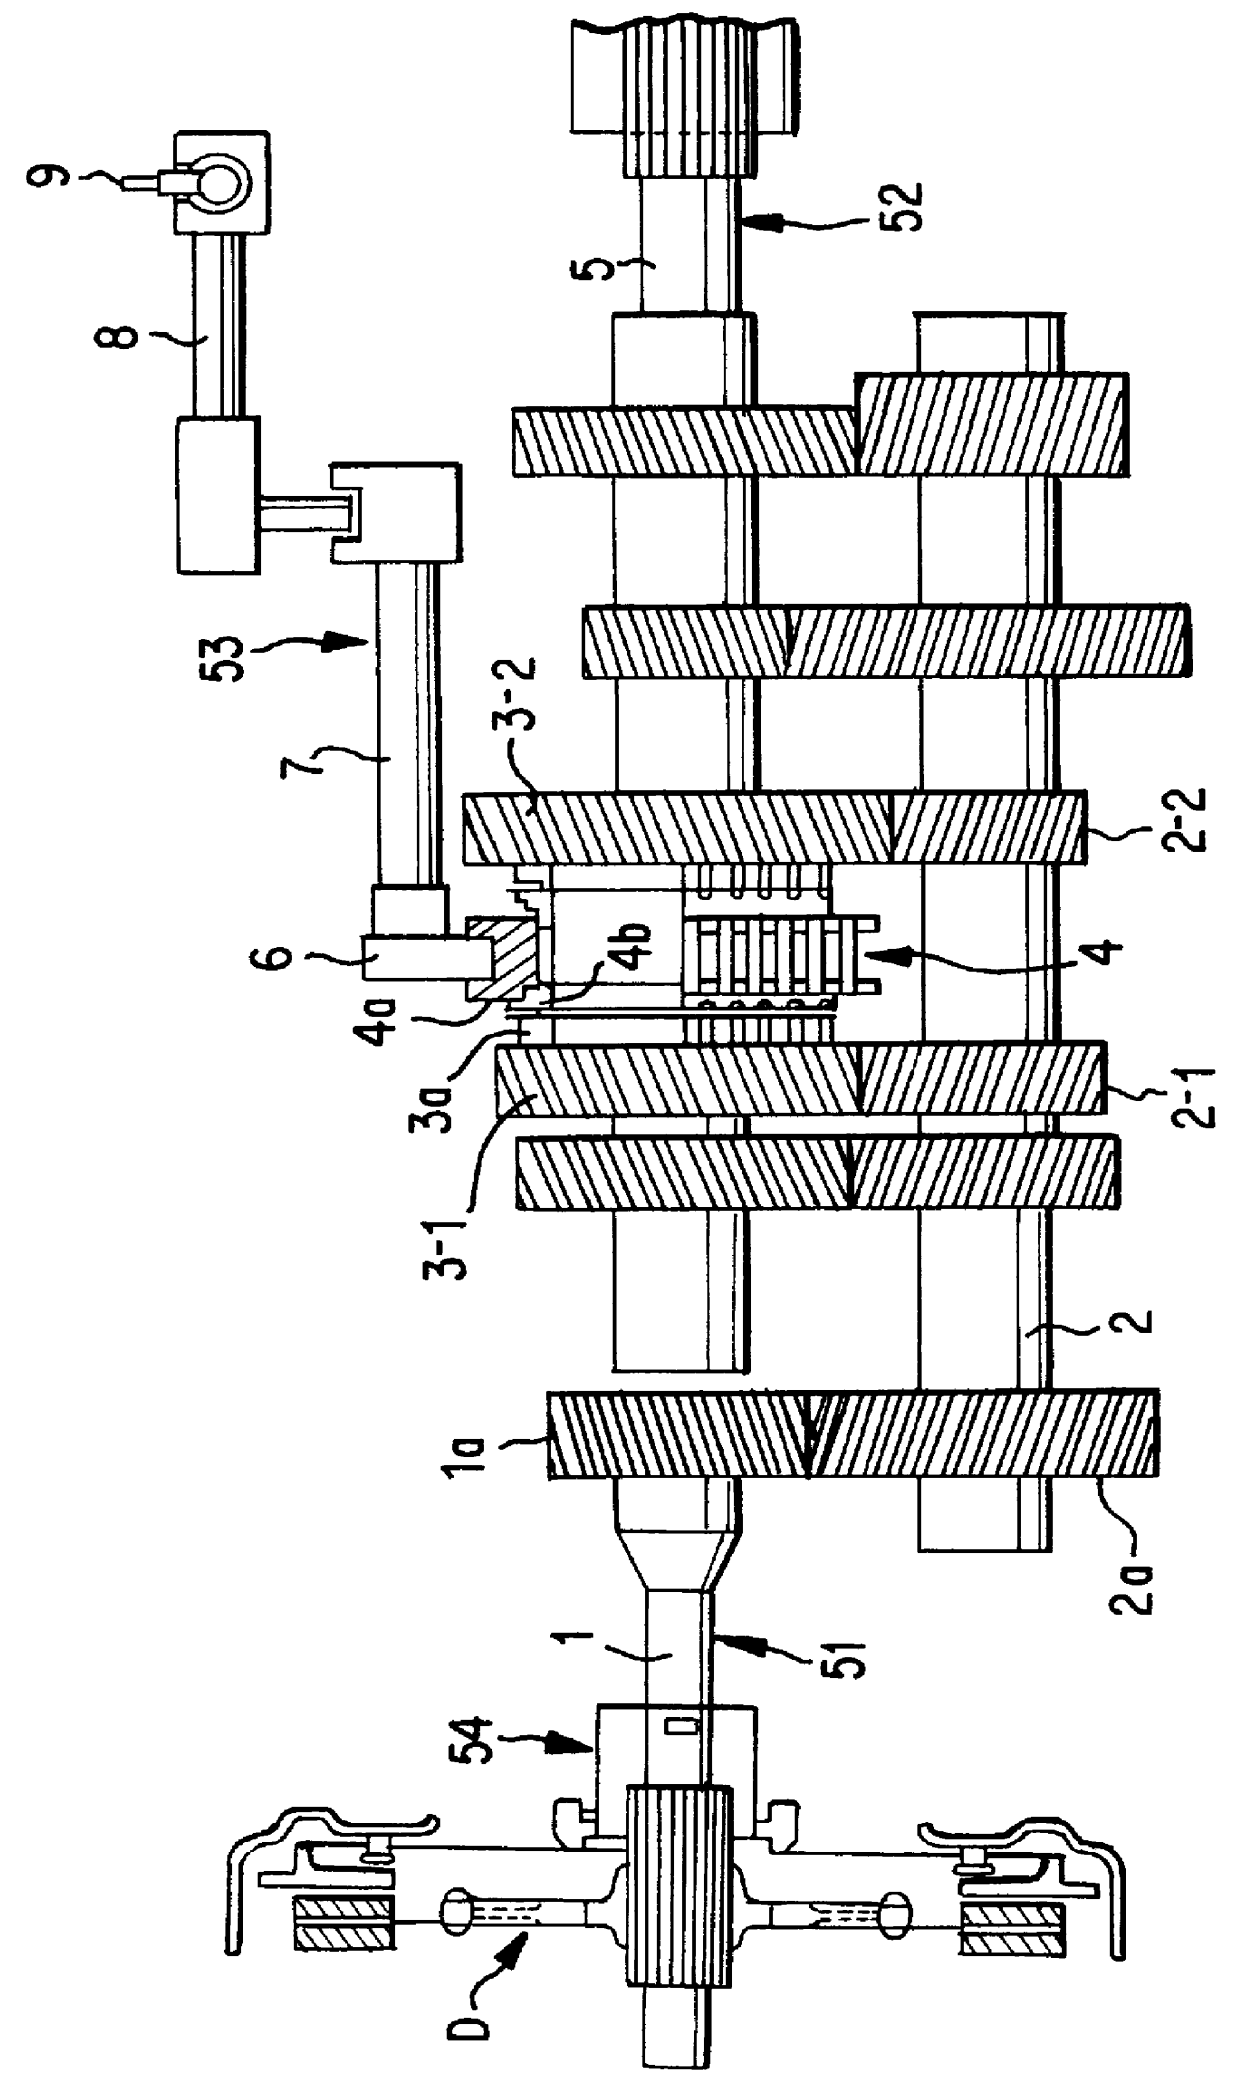 Shifting device for synchromesh-type transmission